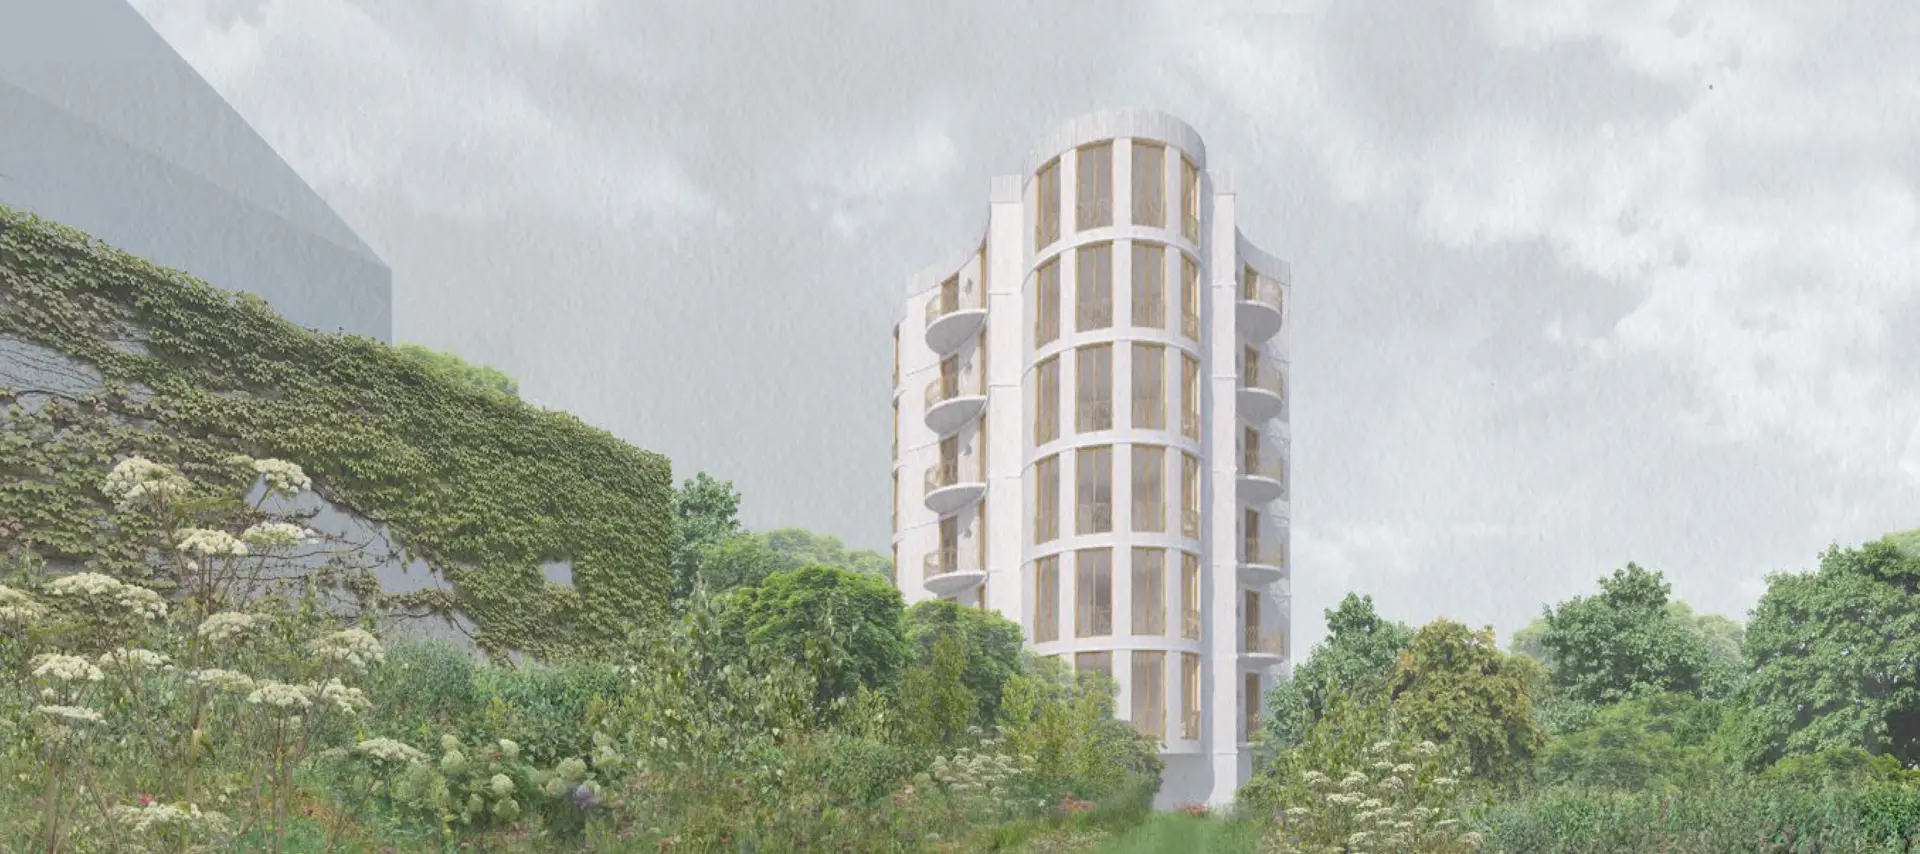 View from street access, the building appears as a folly nestled in a bucolic landscape in suburban Brighton